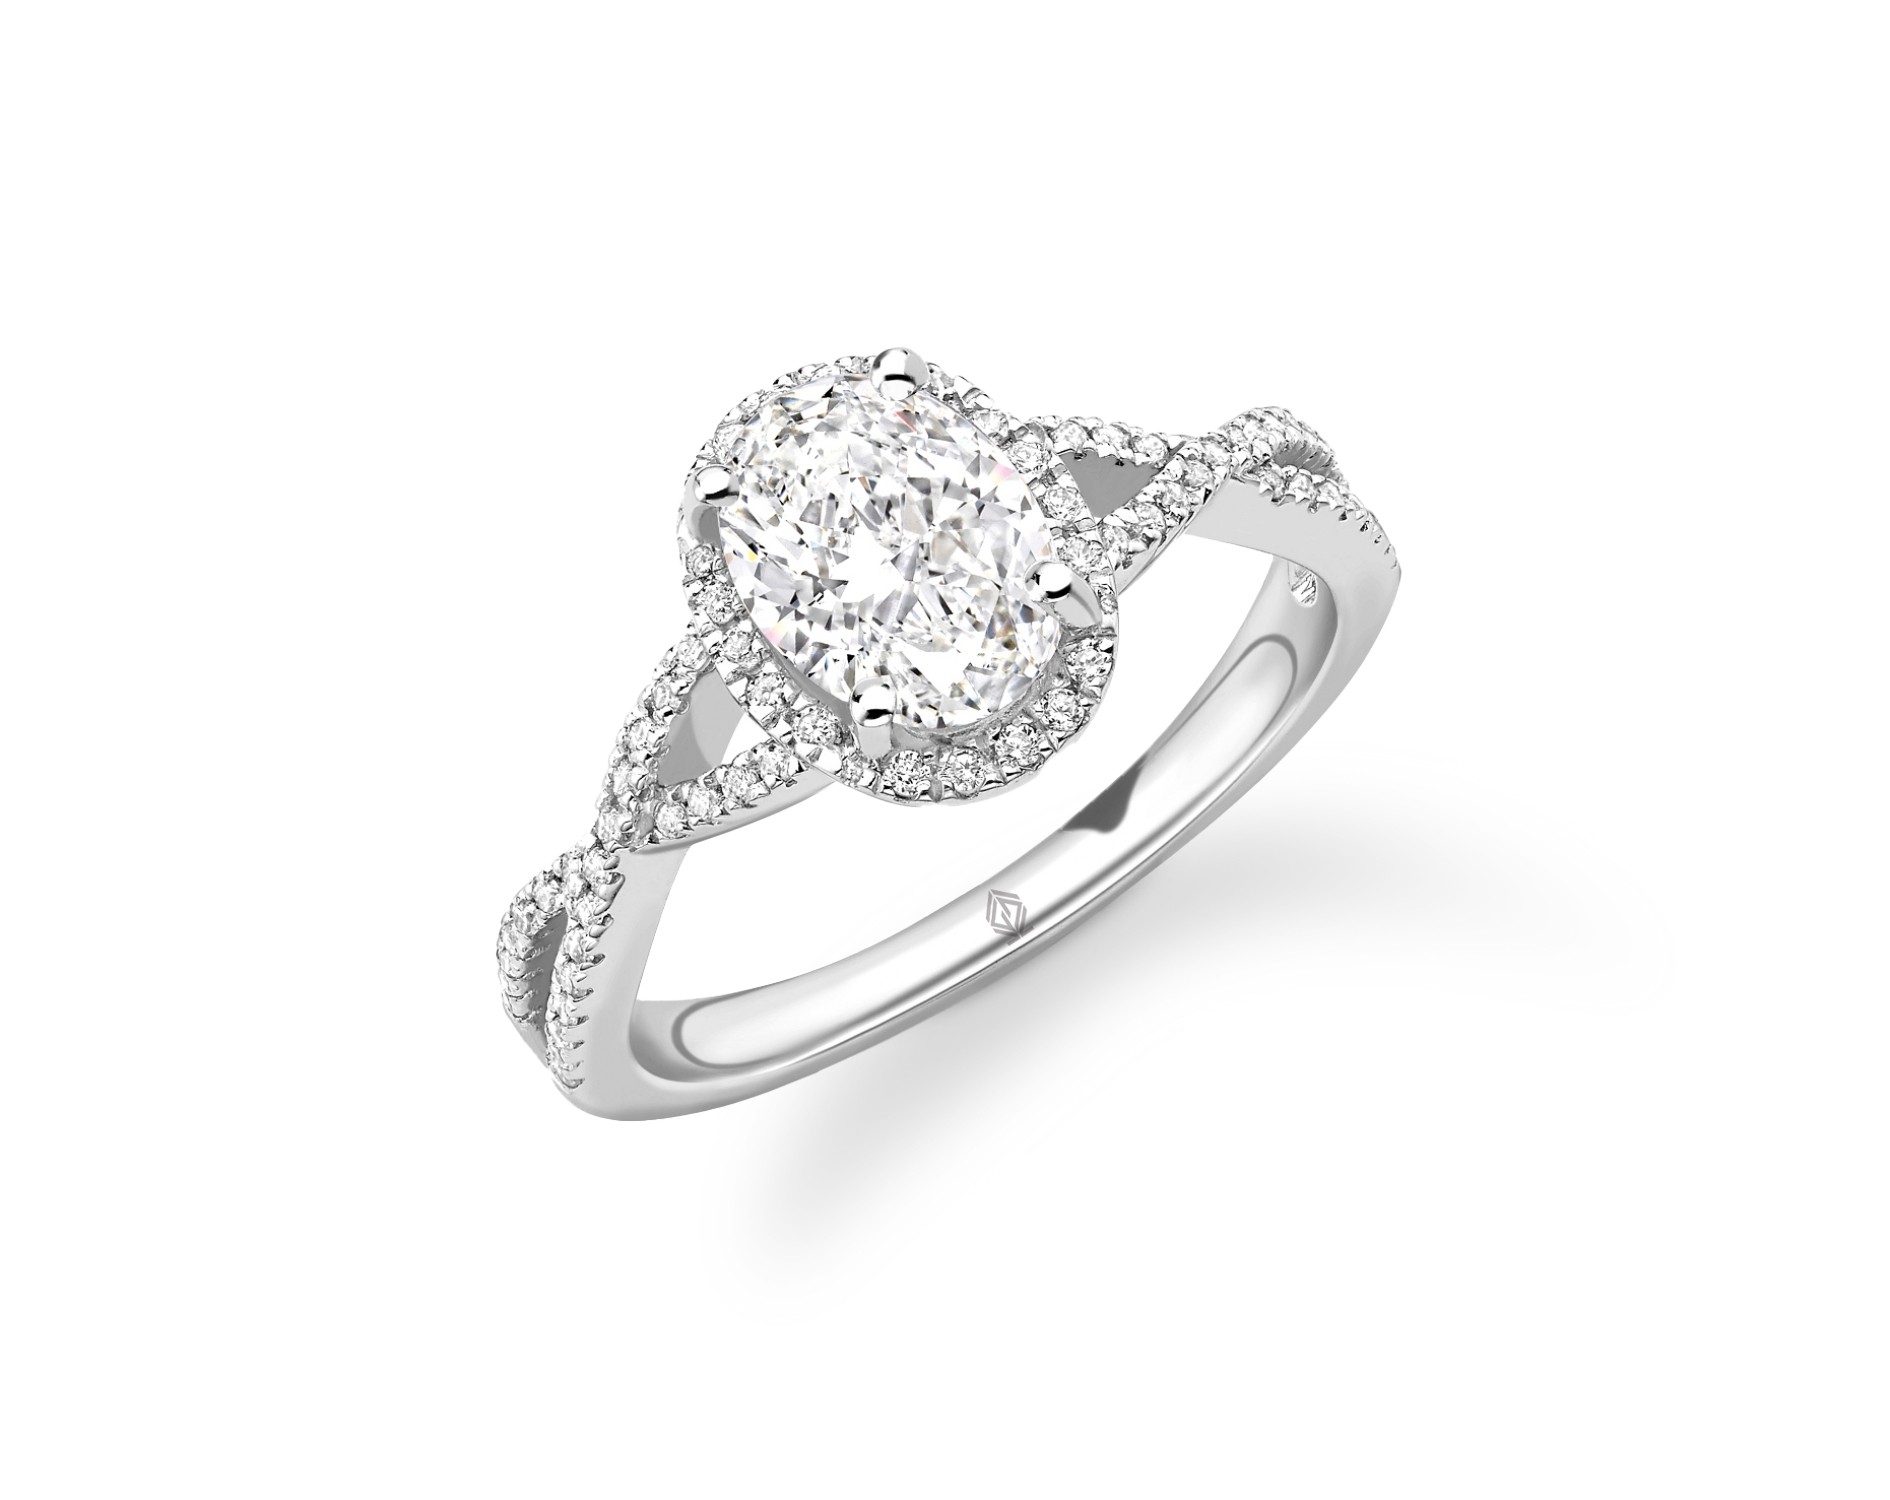 18K WHITE GOLD OVAL CUT HALO DIAMOND ENGAGEMENT RING WITH TWISTED SHANK